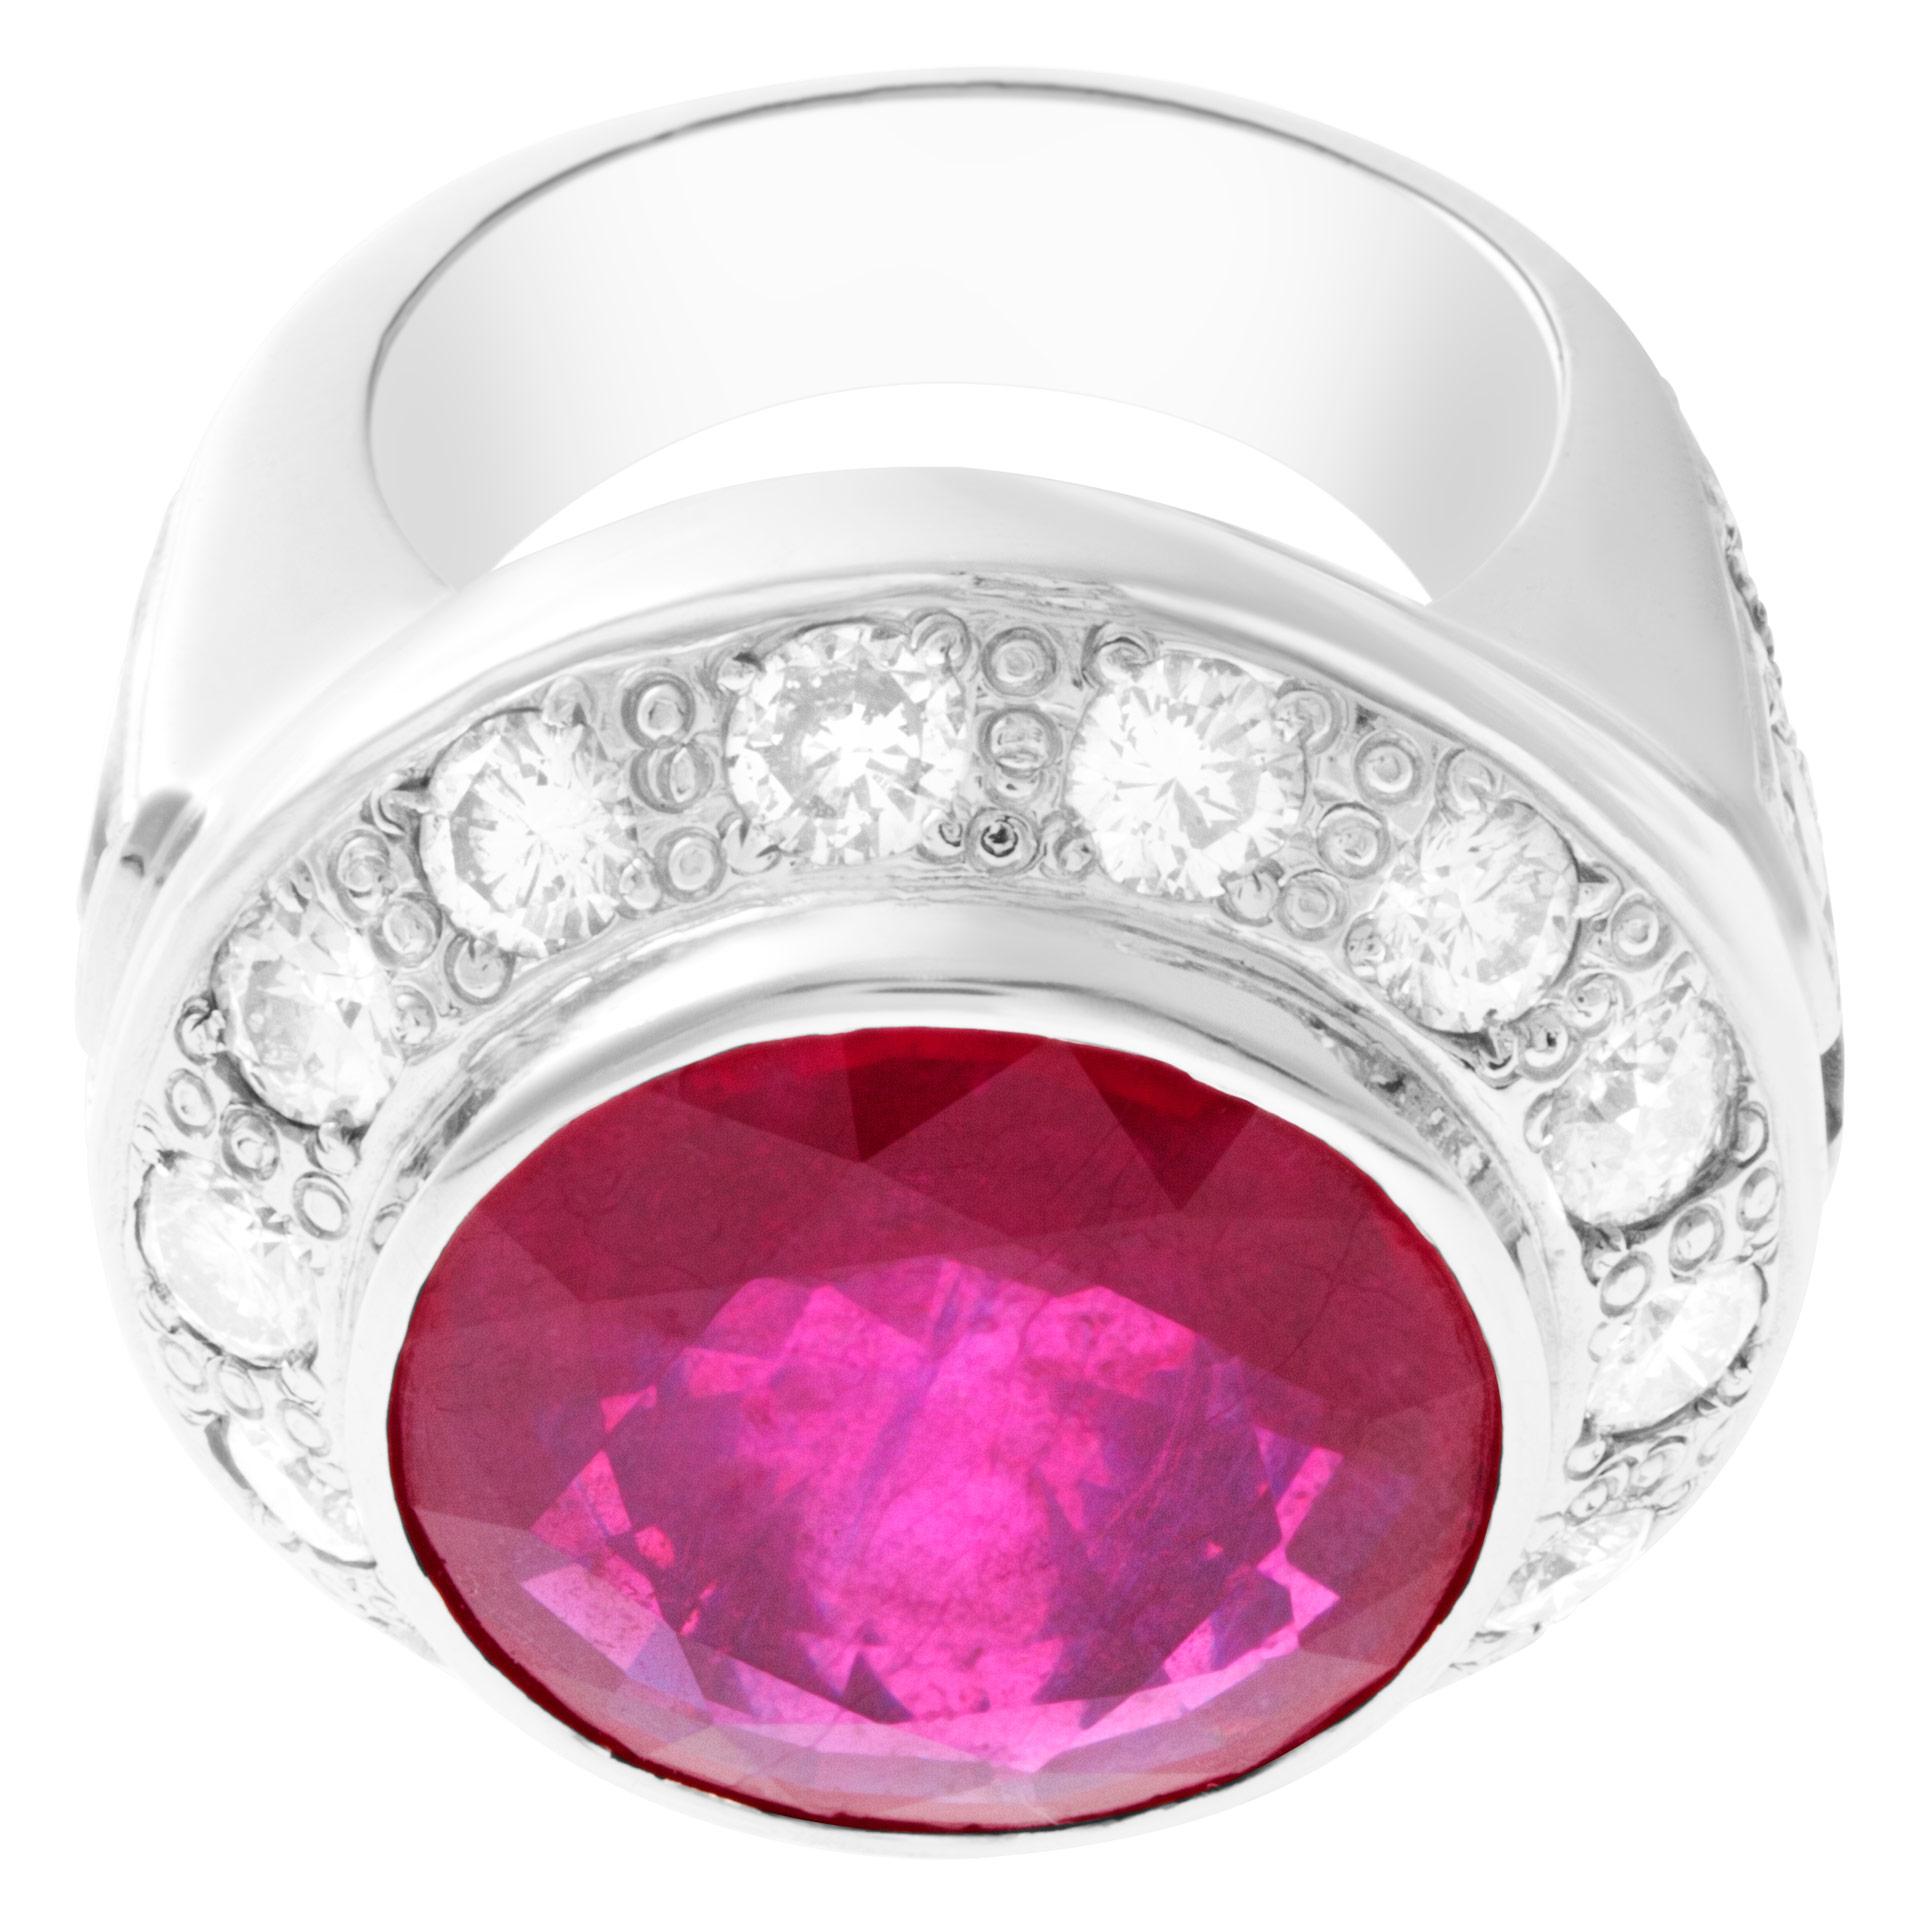 Ruby and Diamond Composite Filled Ring in 18k White Gold Surrounded In Excellent Condition For Sale In Surfside, FL